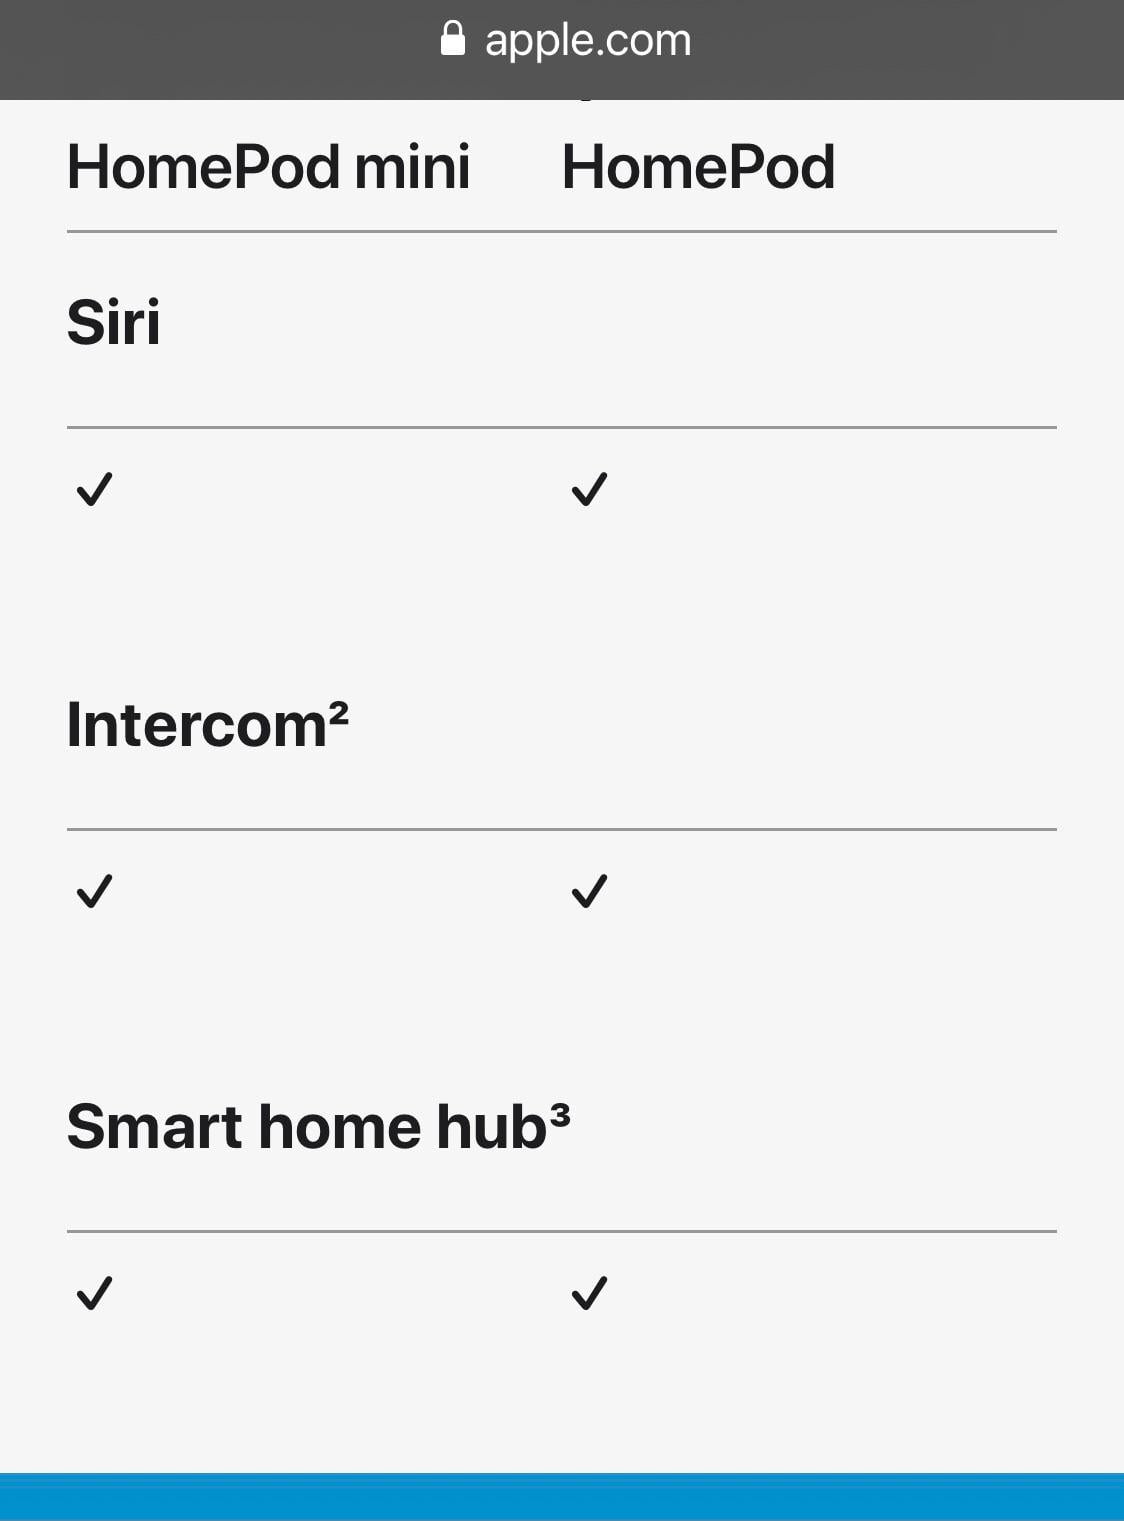 Mini can act as a Home Hub